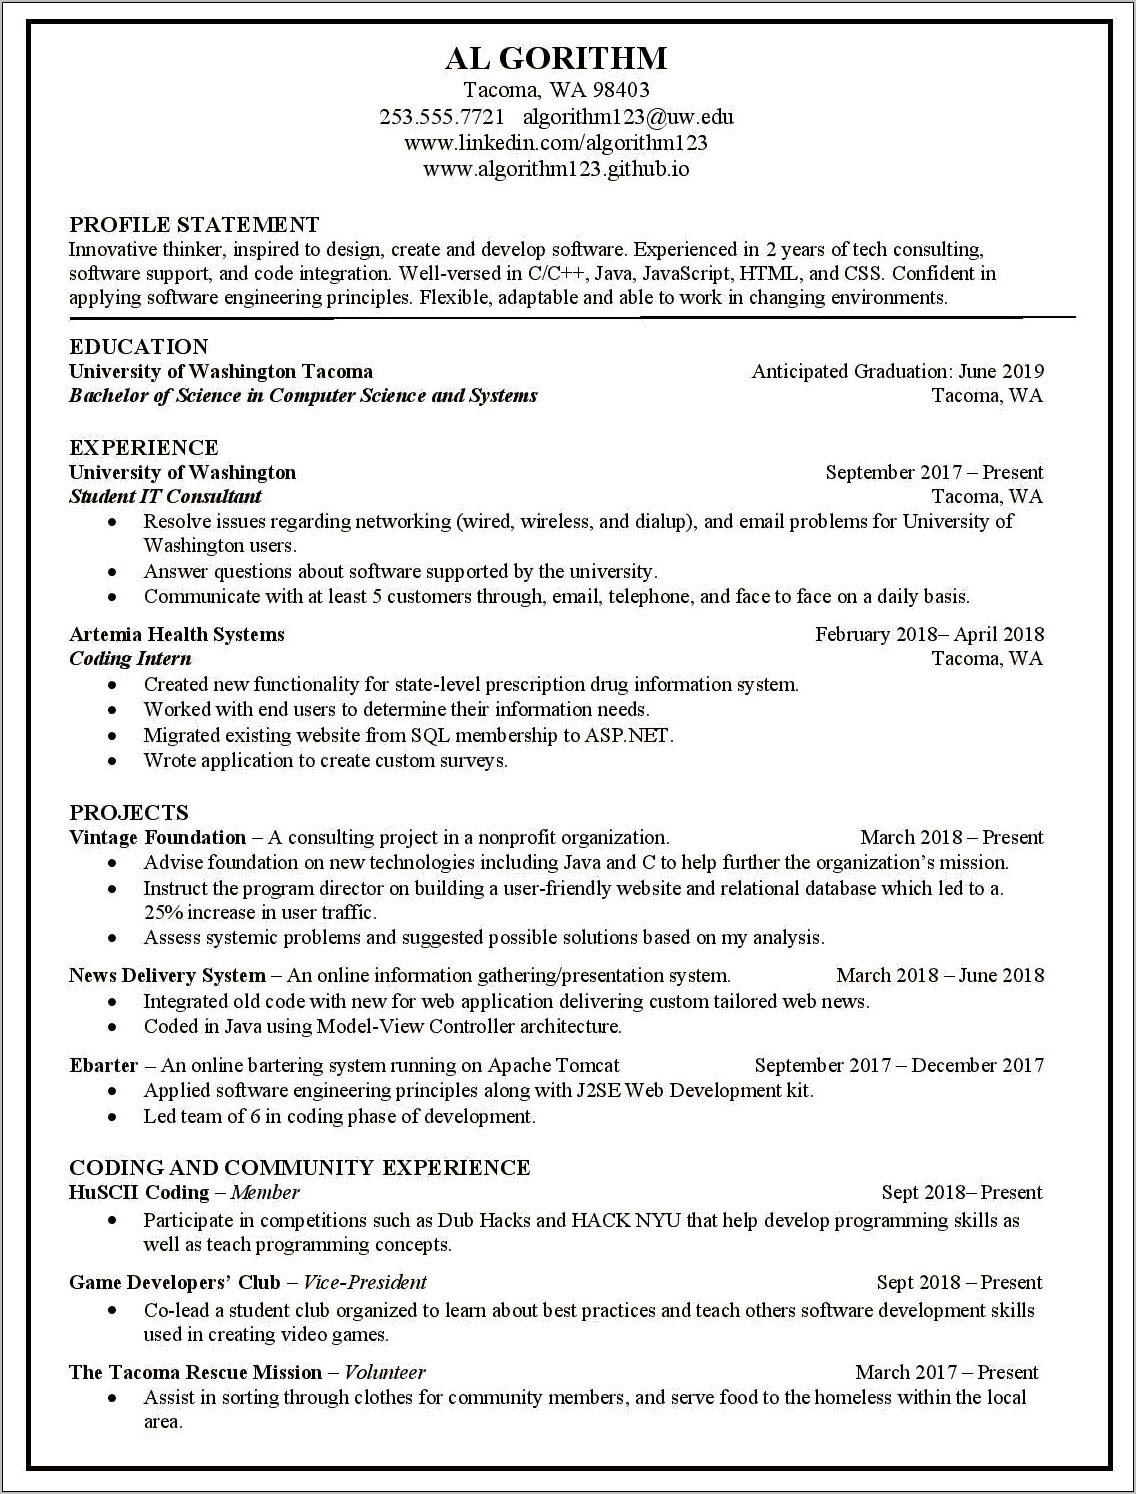 Resume For Teaching Abroad Sample